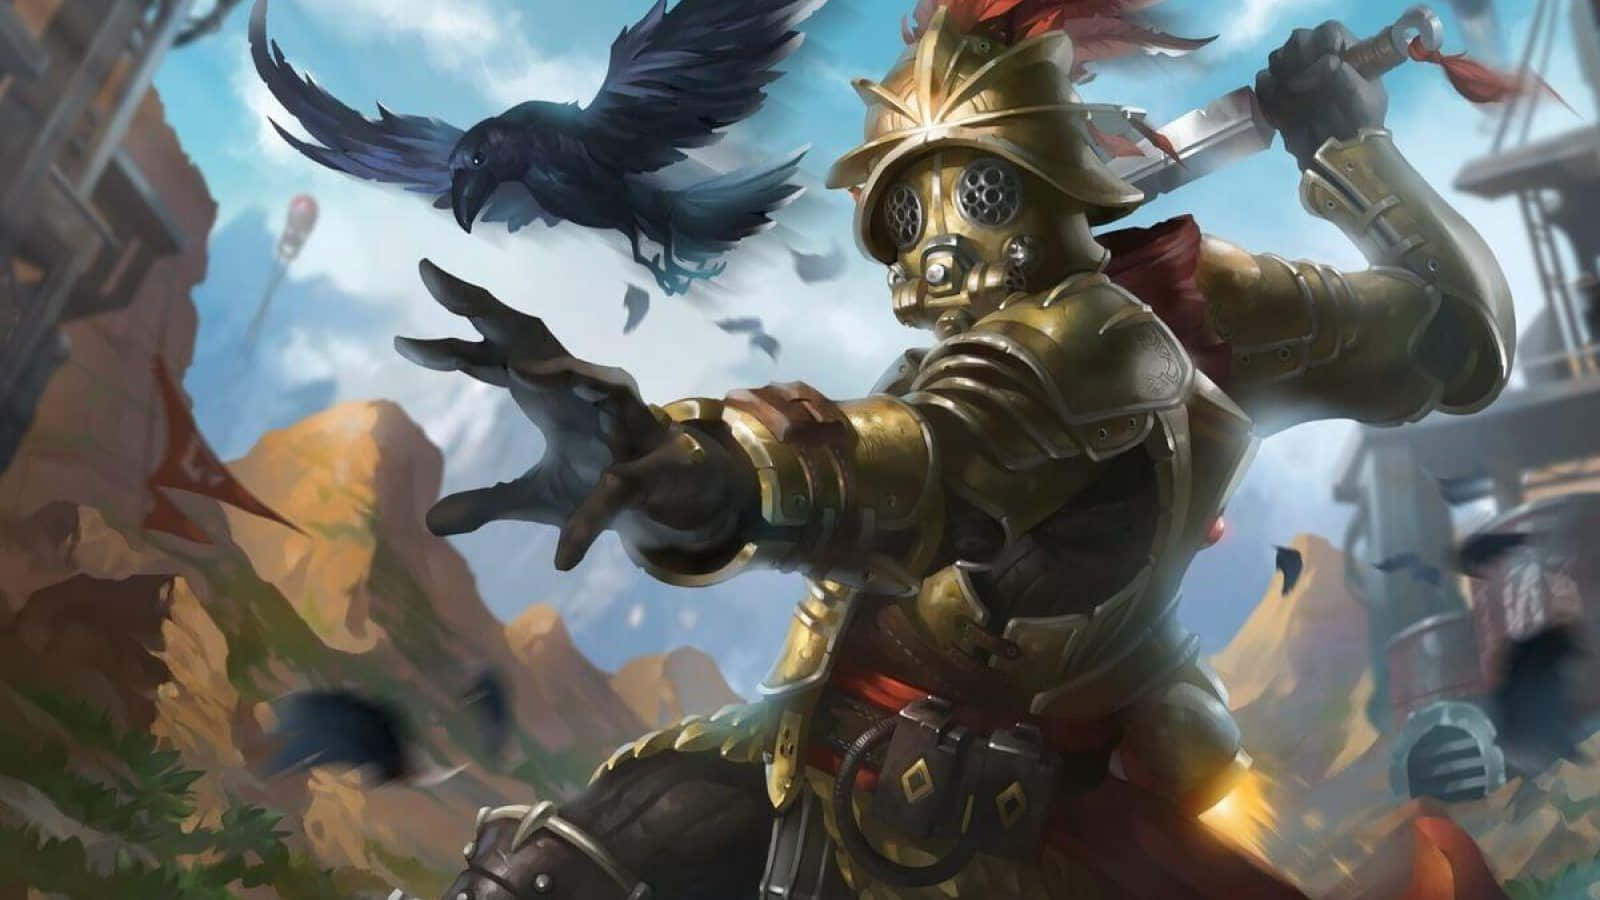 Crypto seeks out innovative security tech to keep his squad safe in Apex Legends Wallpaper